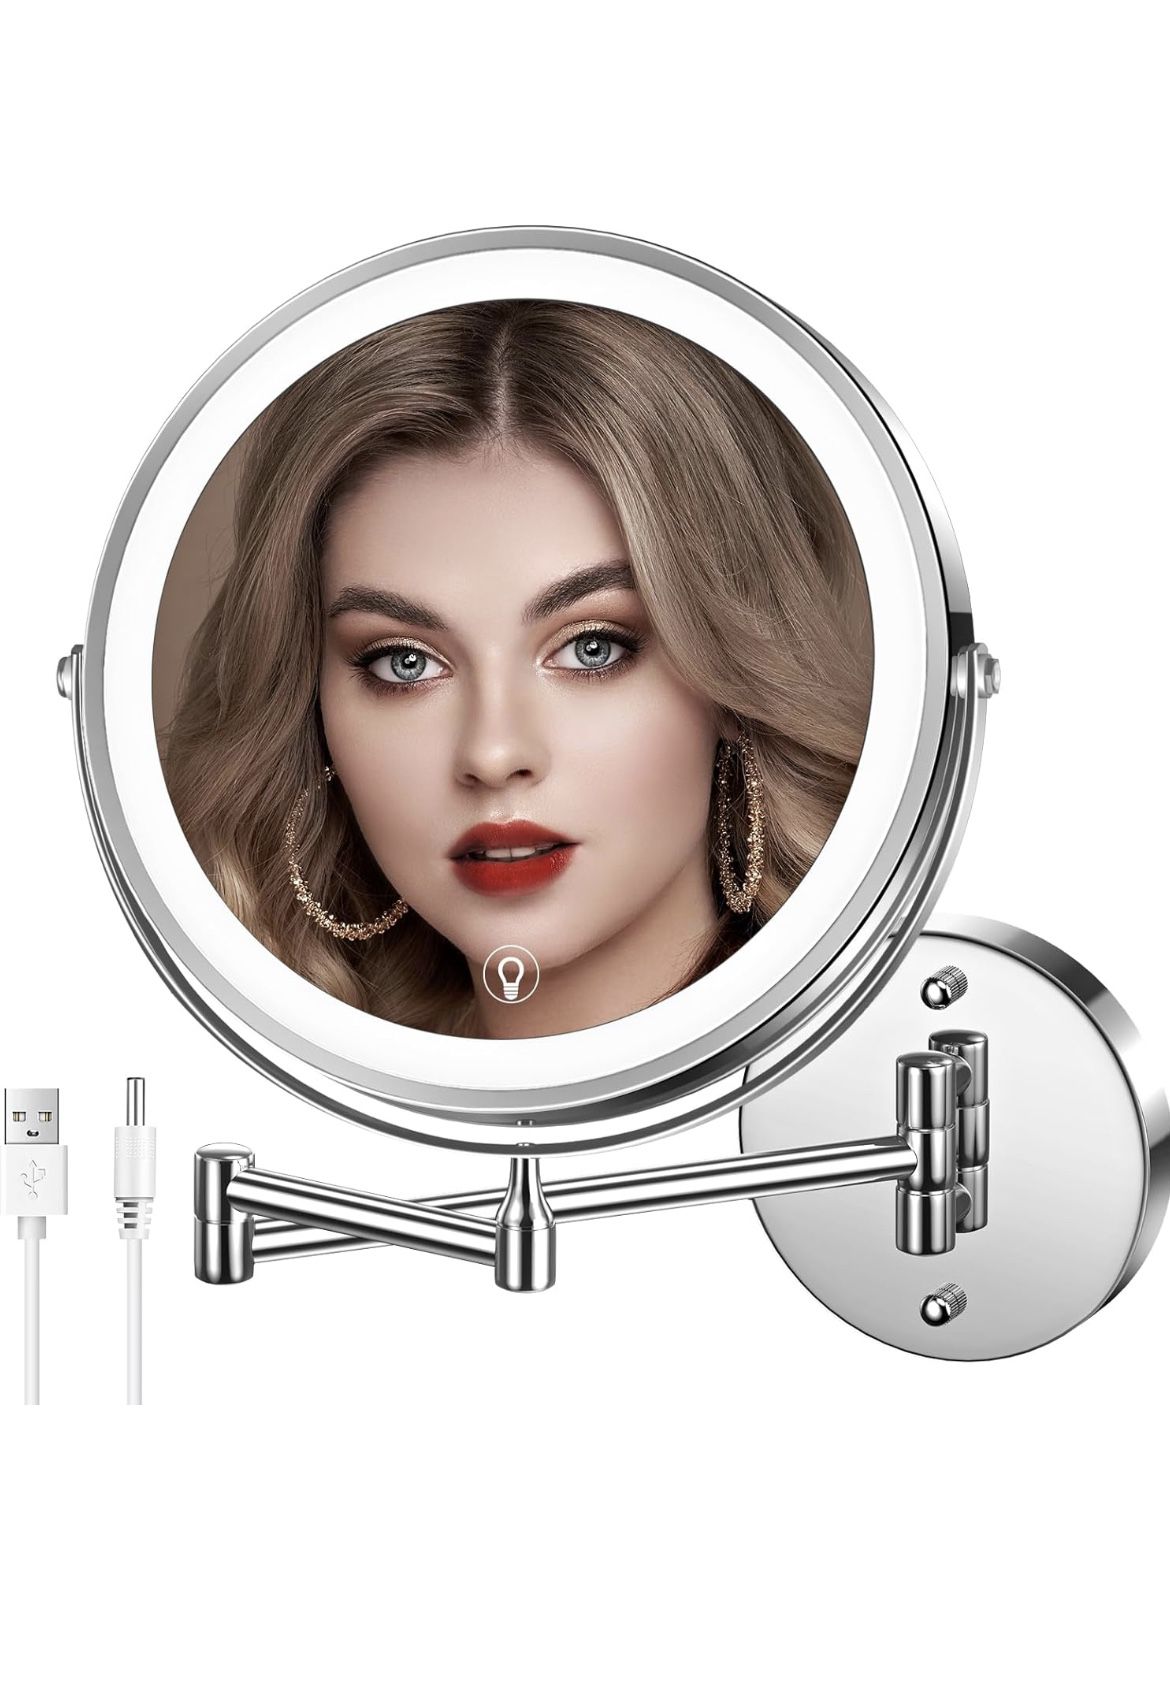 MNIENT Wall Mounted Lighted Makeup Mirror, 8" Rechargeable Double-Sided Magnifying Mirror 1x/10x, 3 Colors Led Vanity Mirror with Lights, Touch Dimmab